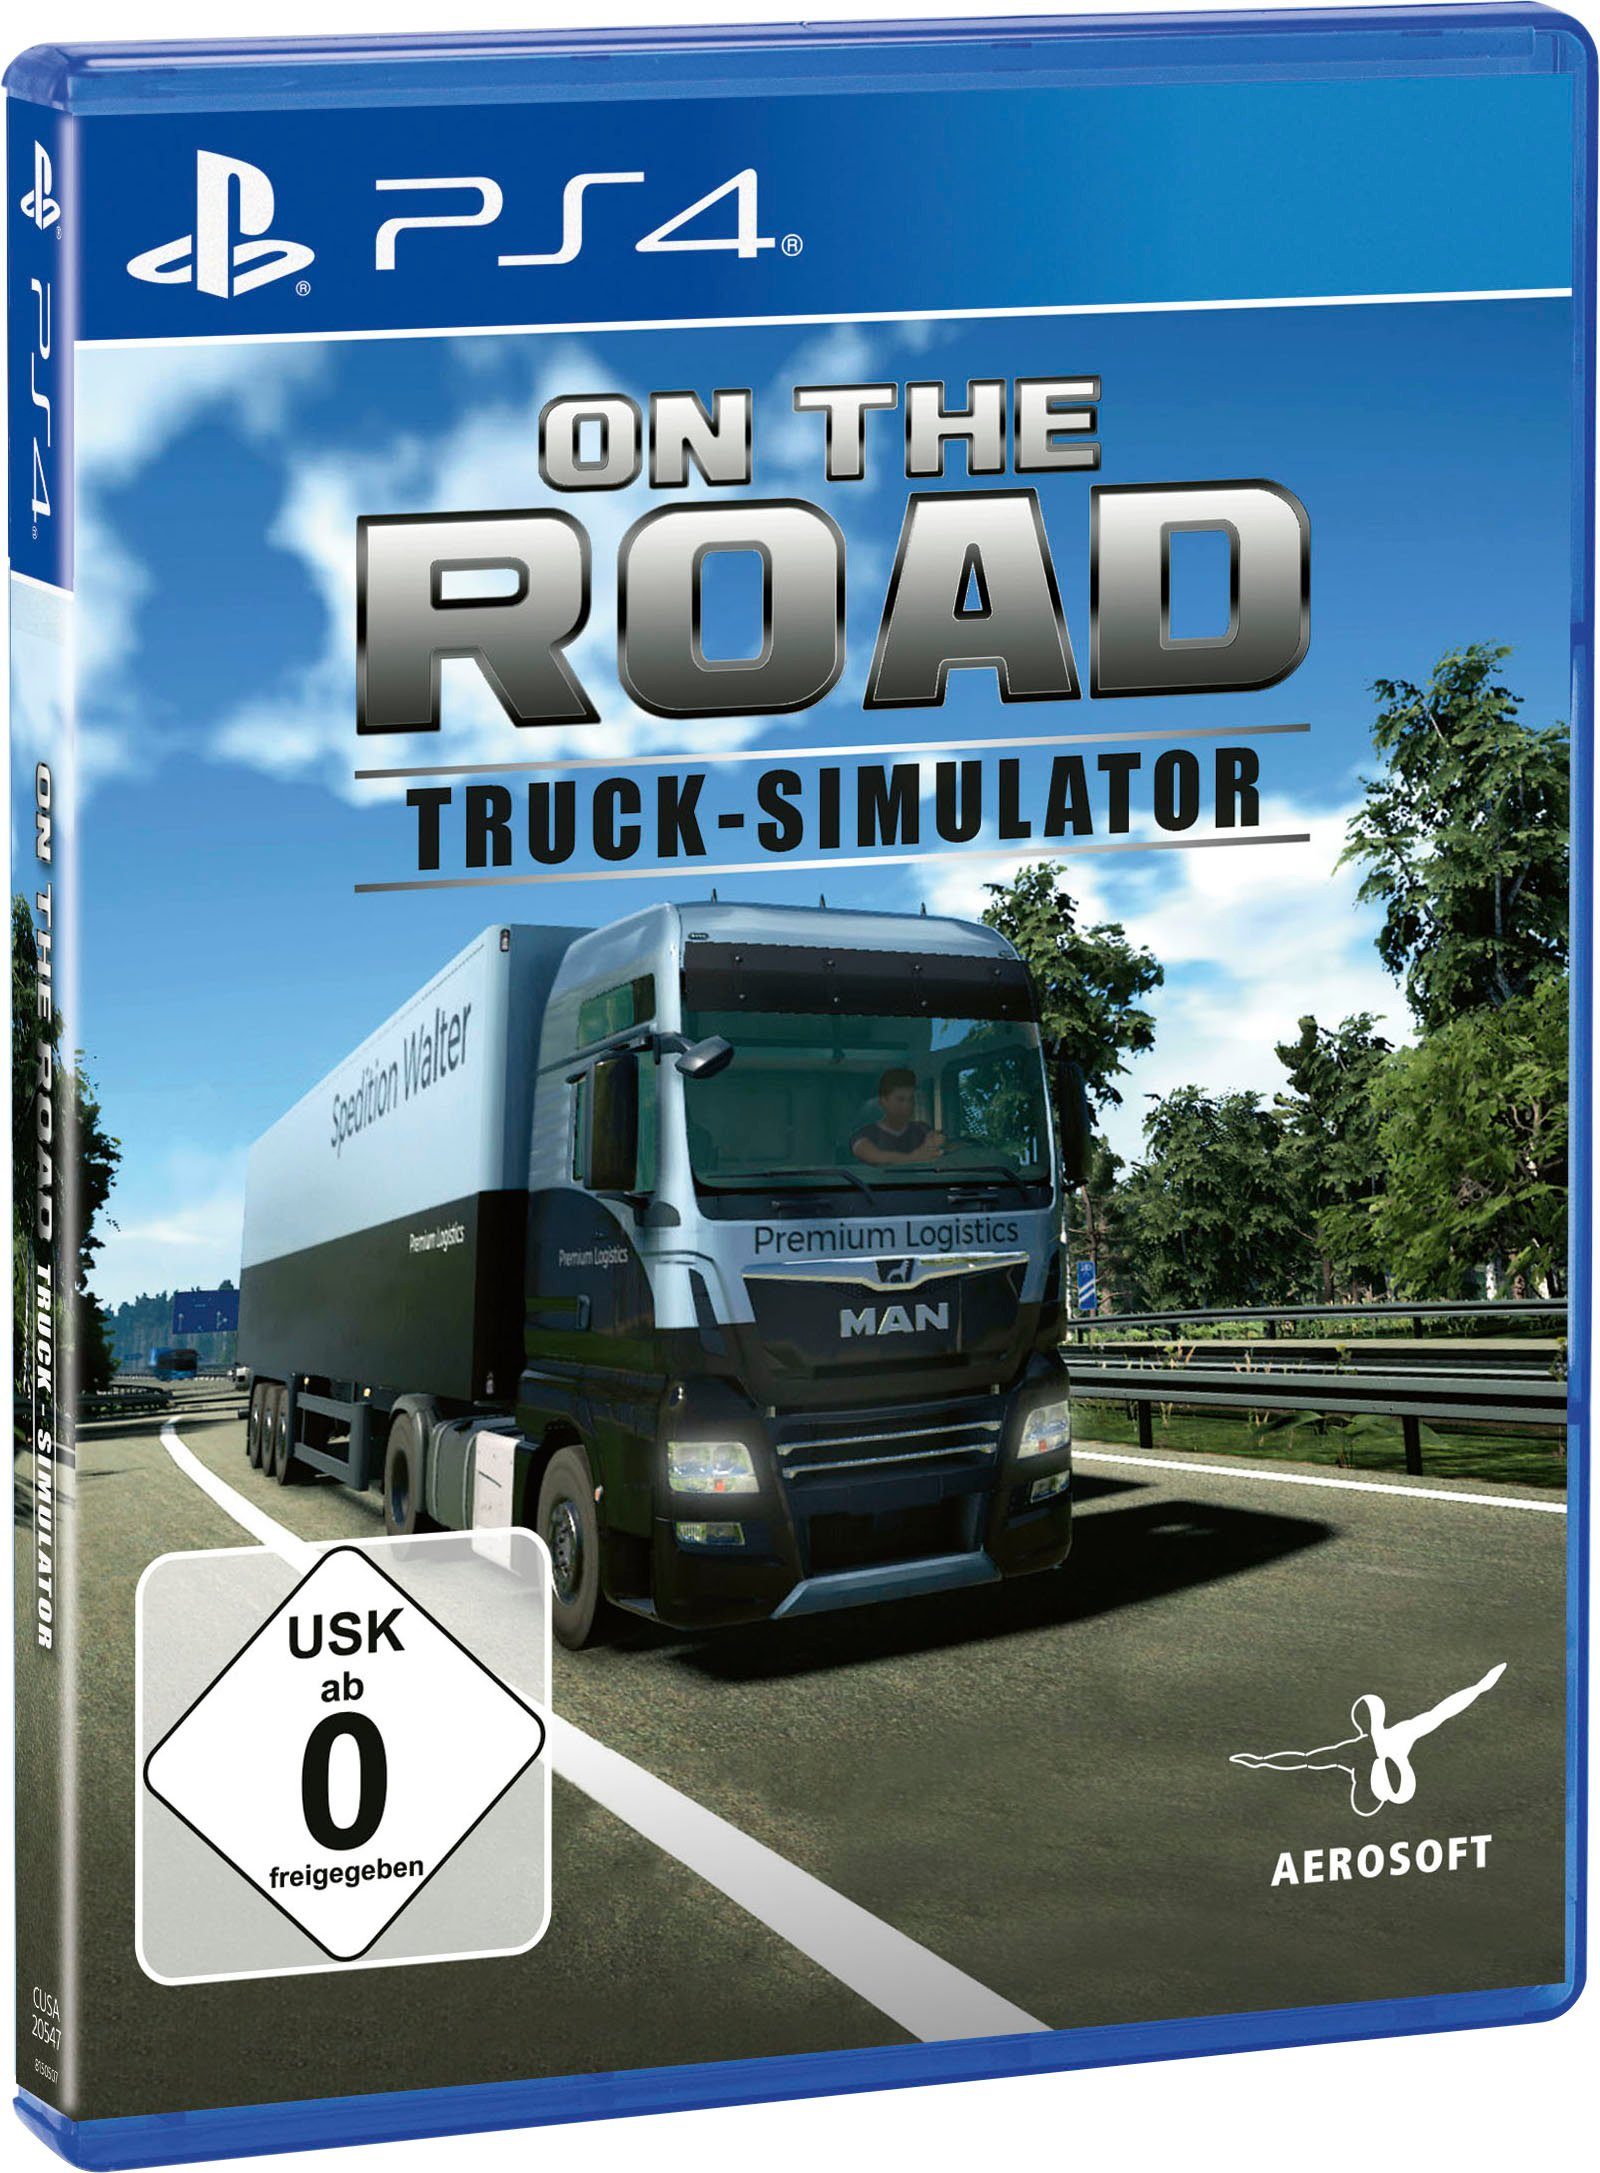 Simulator 4 the Truck - On Road PlayStation